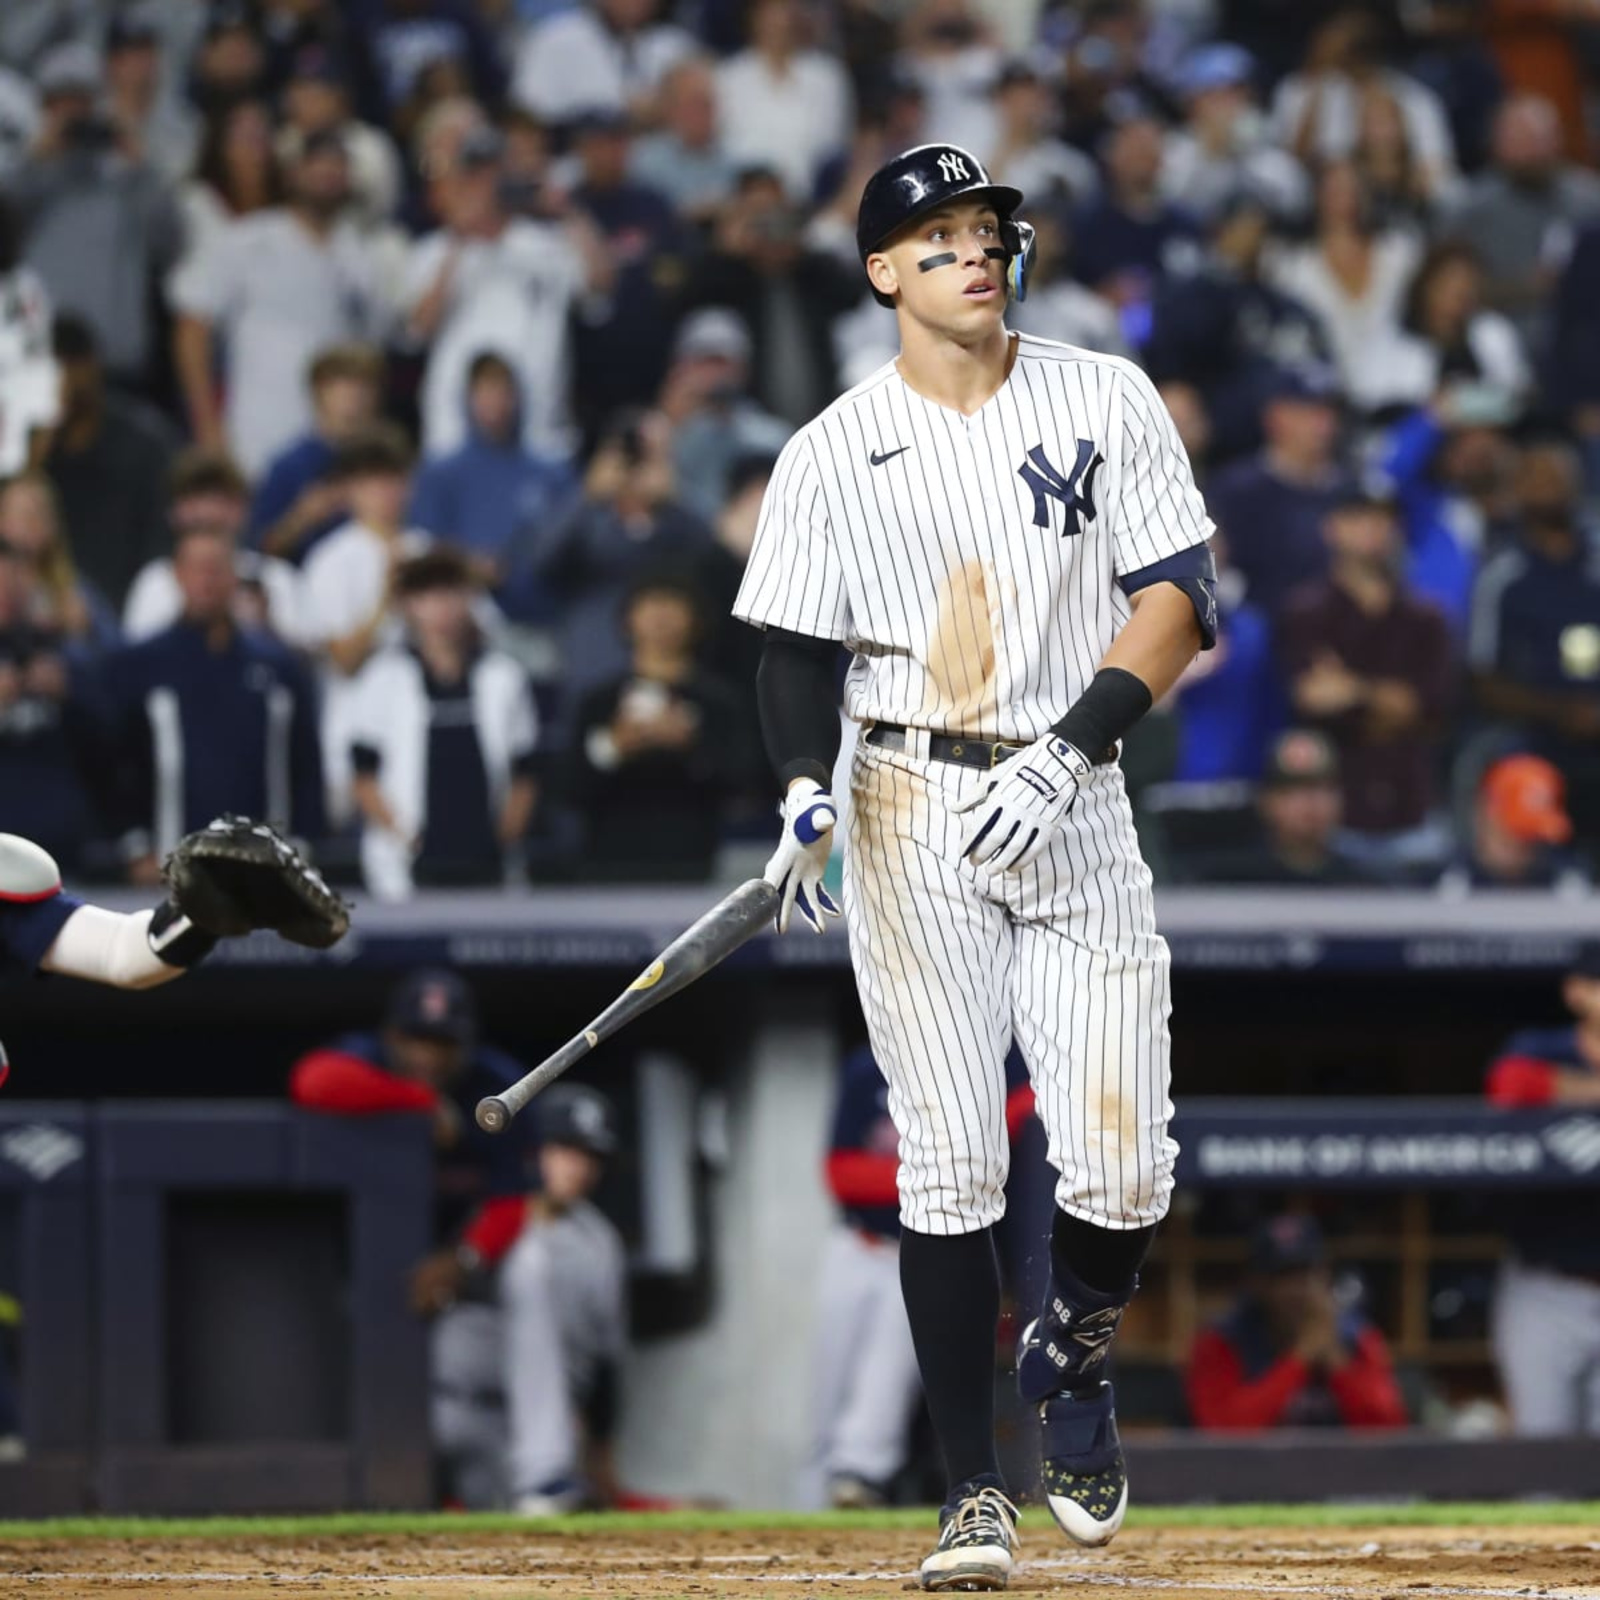 Aaron Judge will get '$300 million-plus' in free agency, MLB insider says